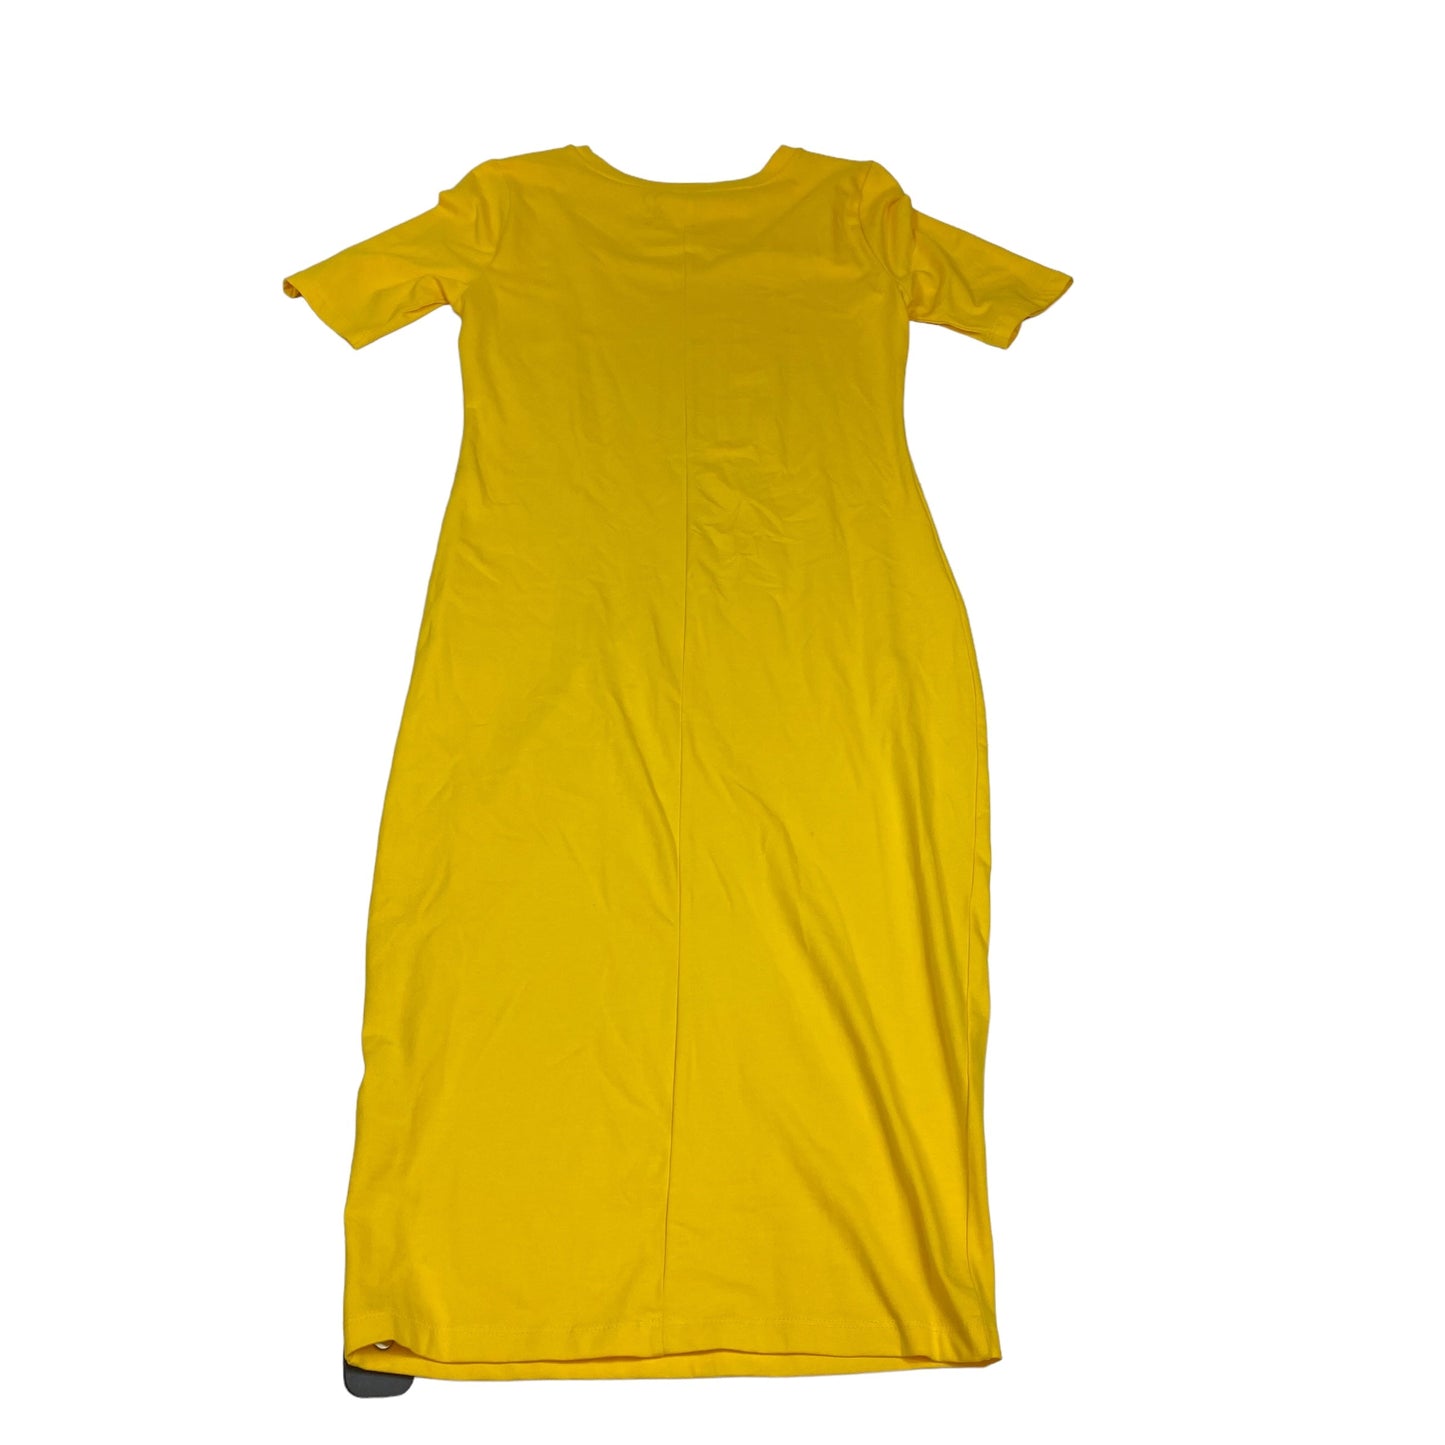 Dress Casual Midi By New York And Co  Size: M